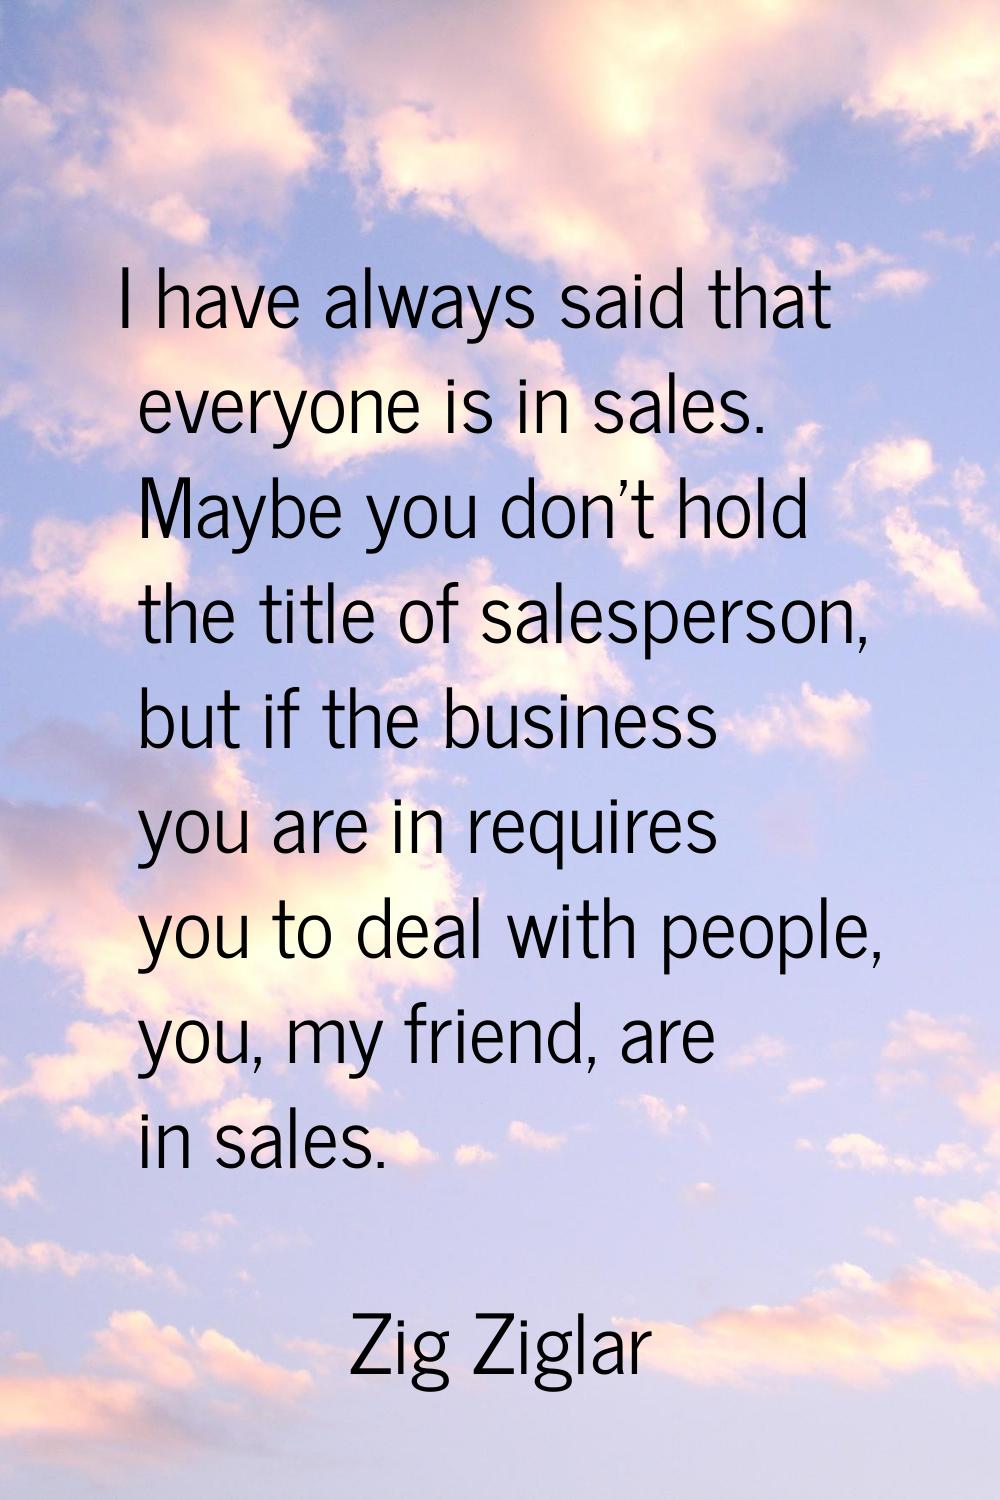 I have always said that everyone is in sales. Maybe you don't hold the title of salesperson, but if